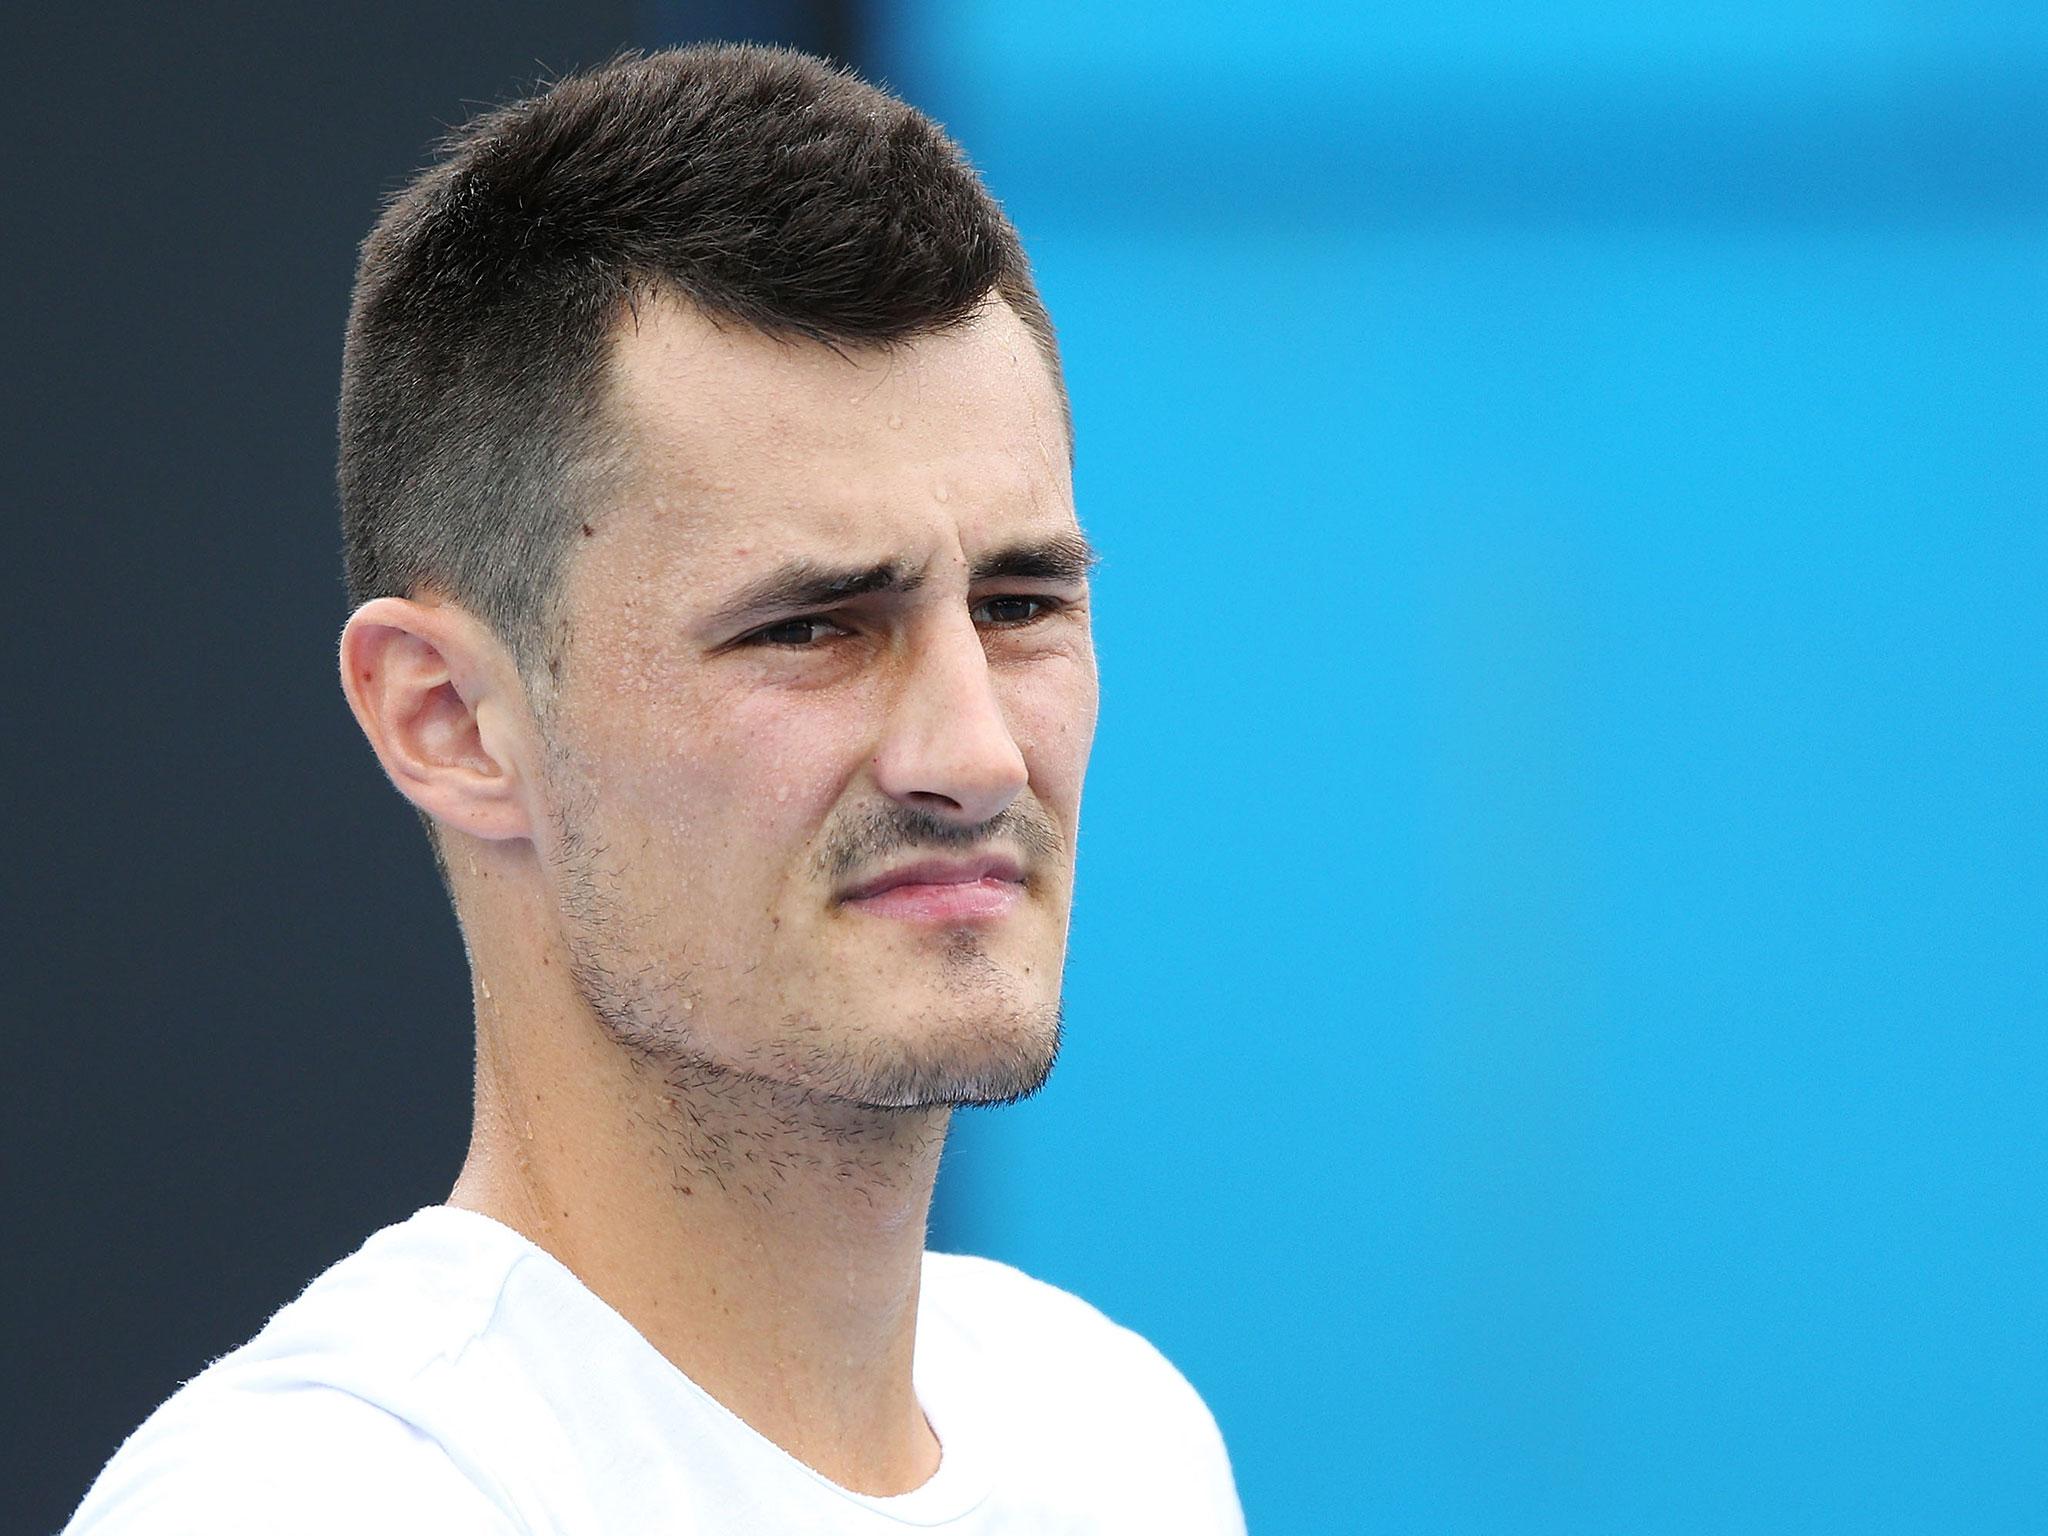 Bernard Tomic has suffered a disappointing fall from grace